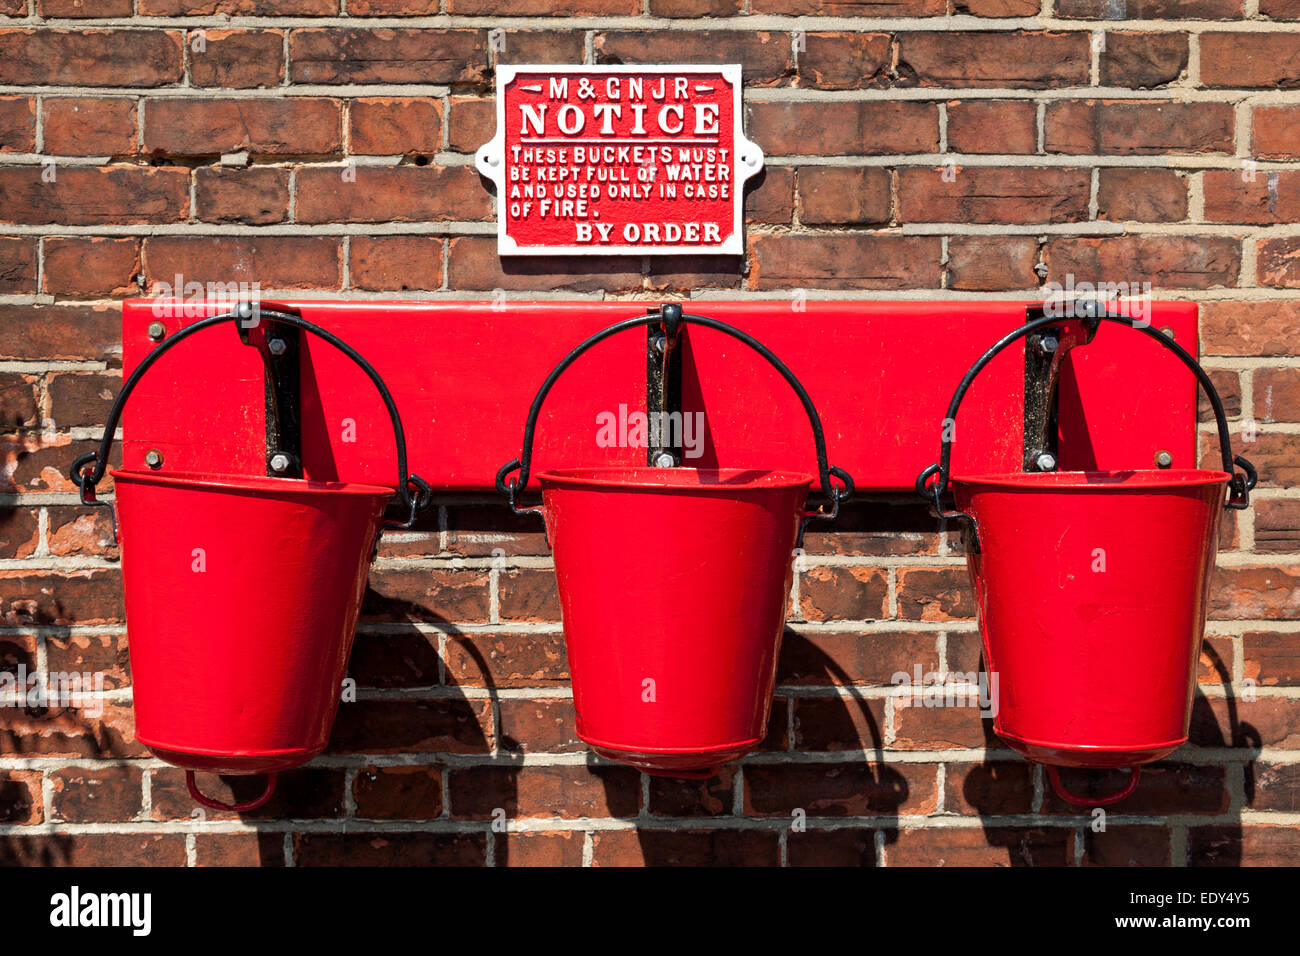 Bucket Buckets High Resolution Stock Photography and Images - Alamy